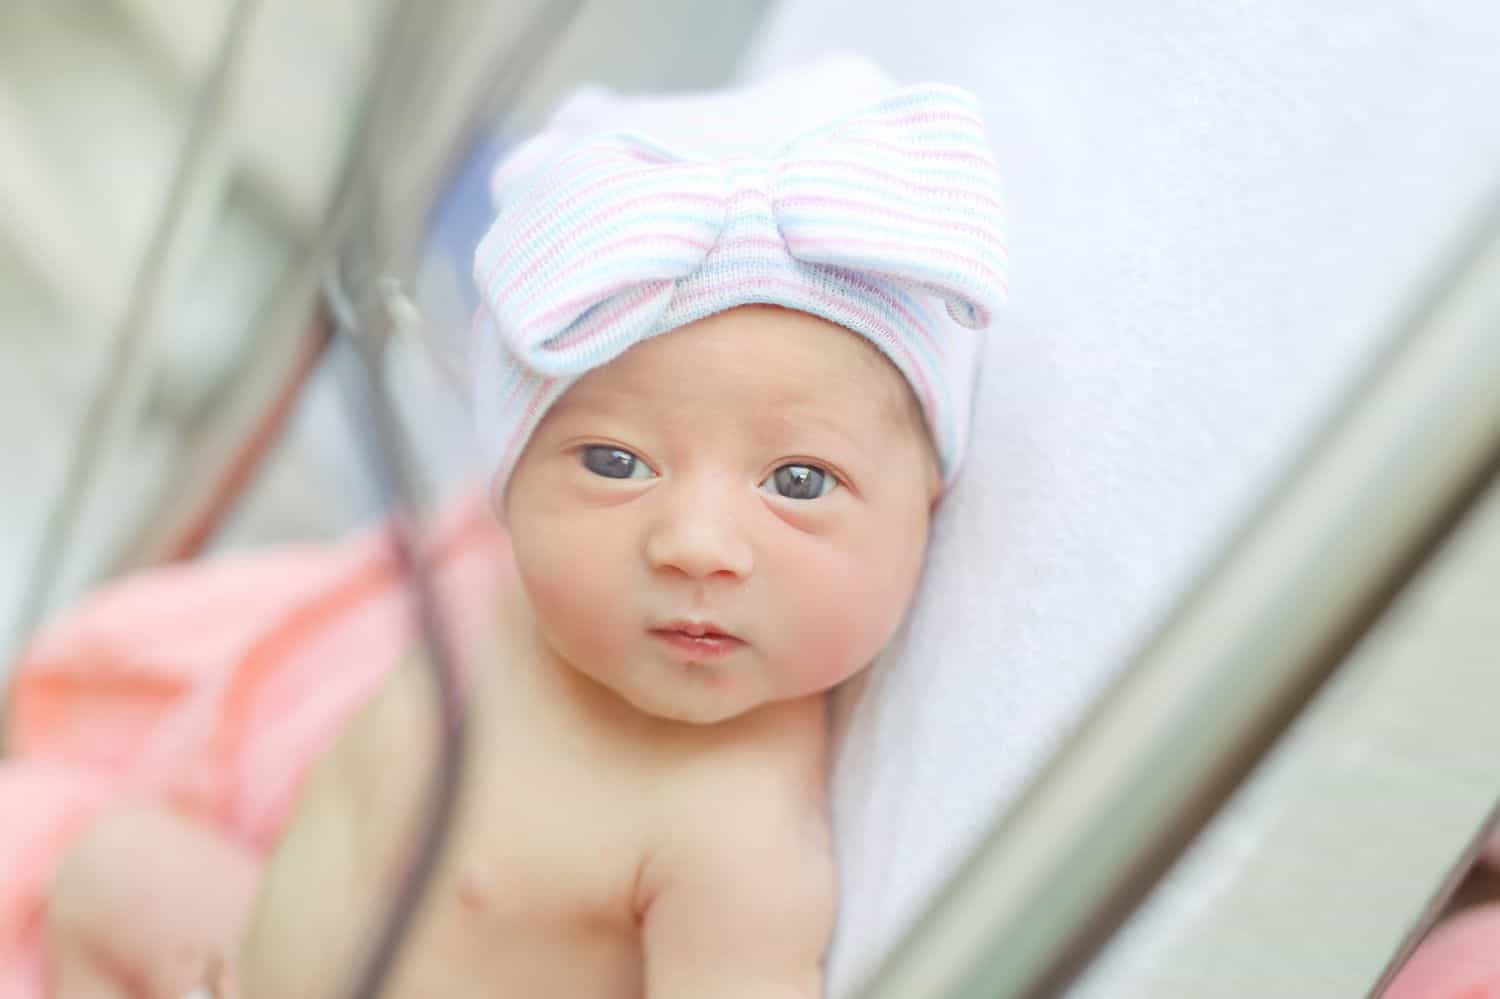 How To Attract New Clients In 3 Bold Business Moves: Newborn in hospital by Cassie Clayshulte